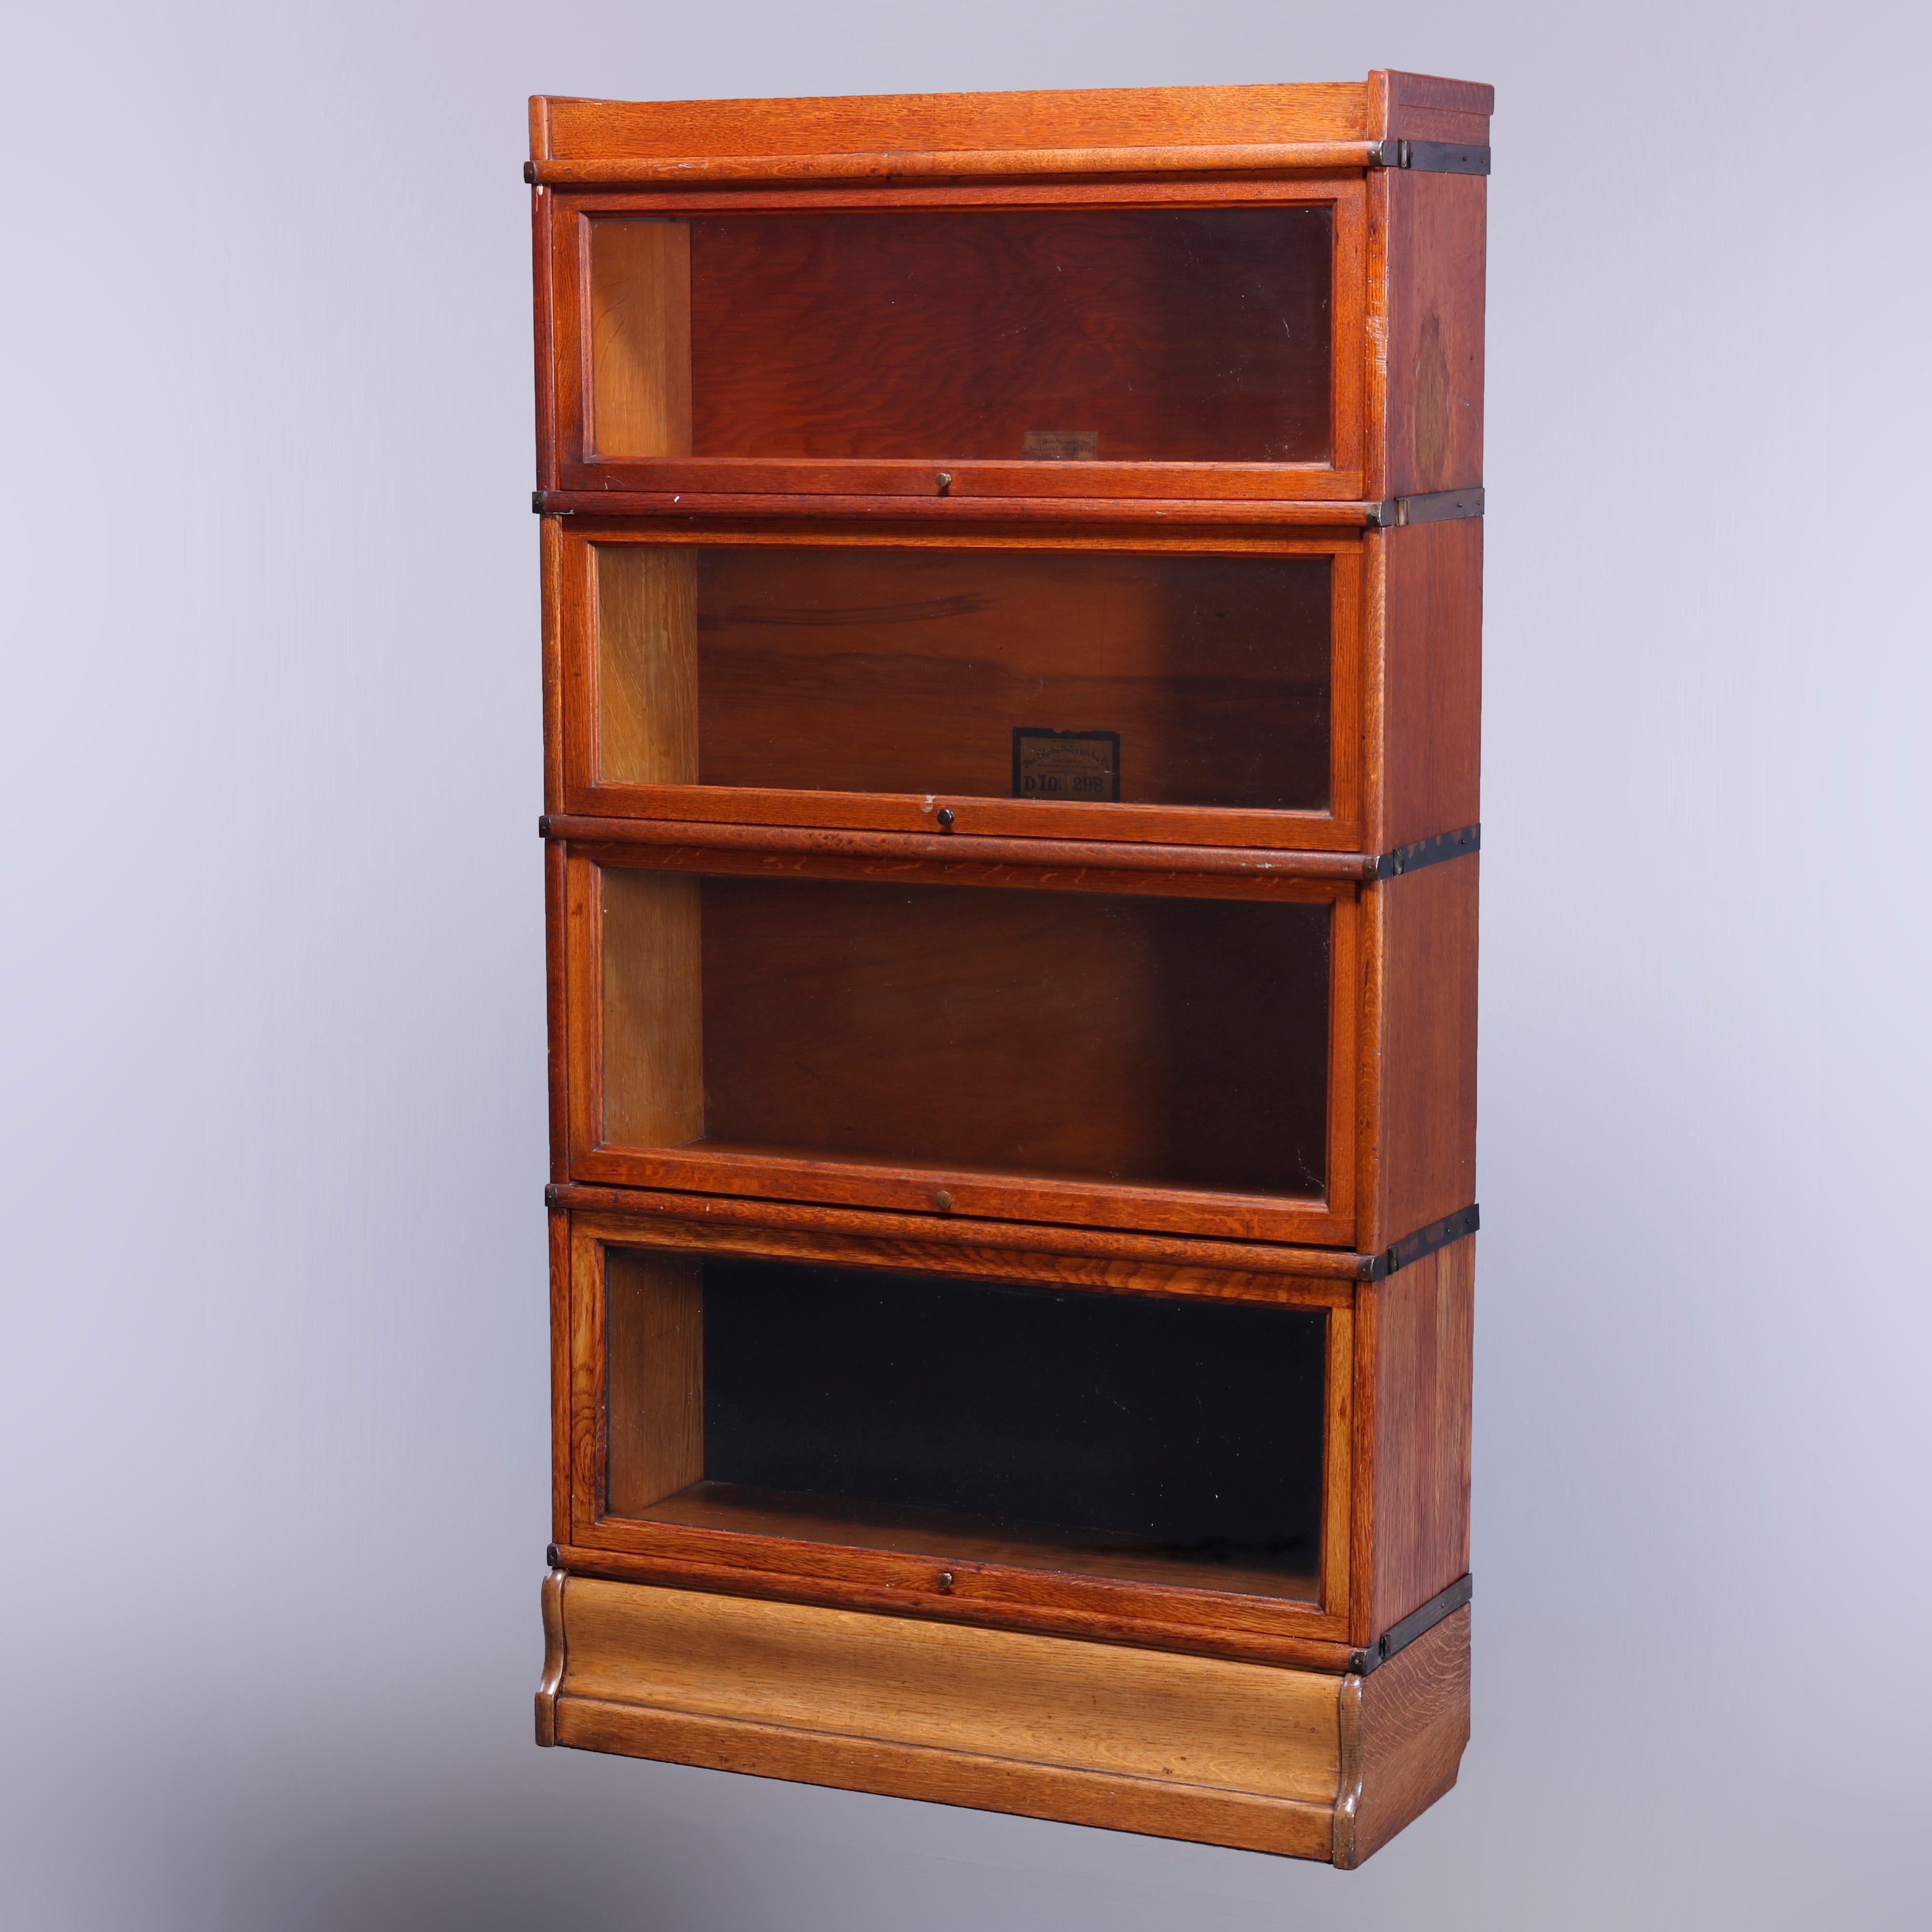 An antique Arts and Crafts barrister bookcase by Globe Wernicke offers quarter sawn oak construction with four stacks, each having pullout glass doors, raised on ogee base, maker labels as photographed, c1910

Measures - 63.5'' H x 34'' W x 12.5''